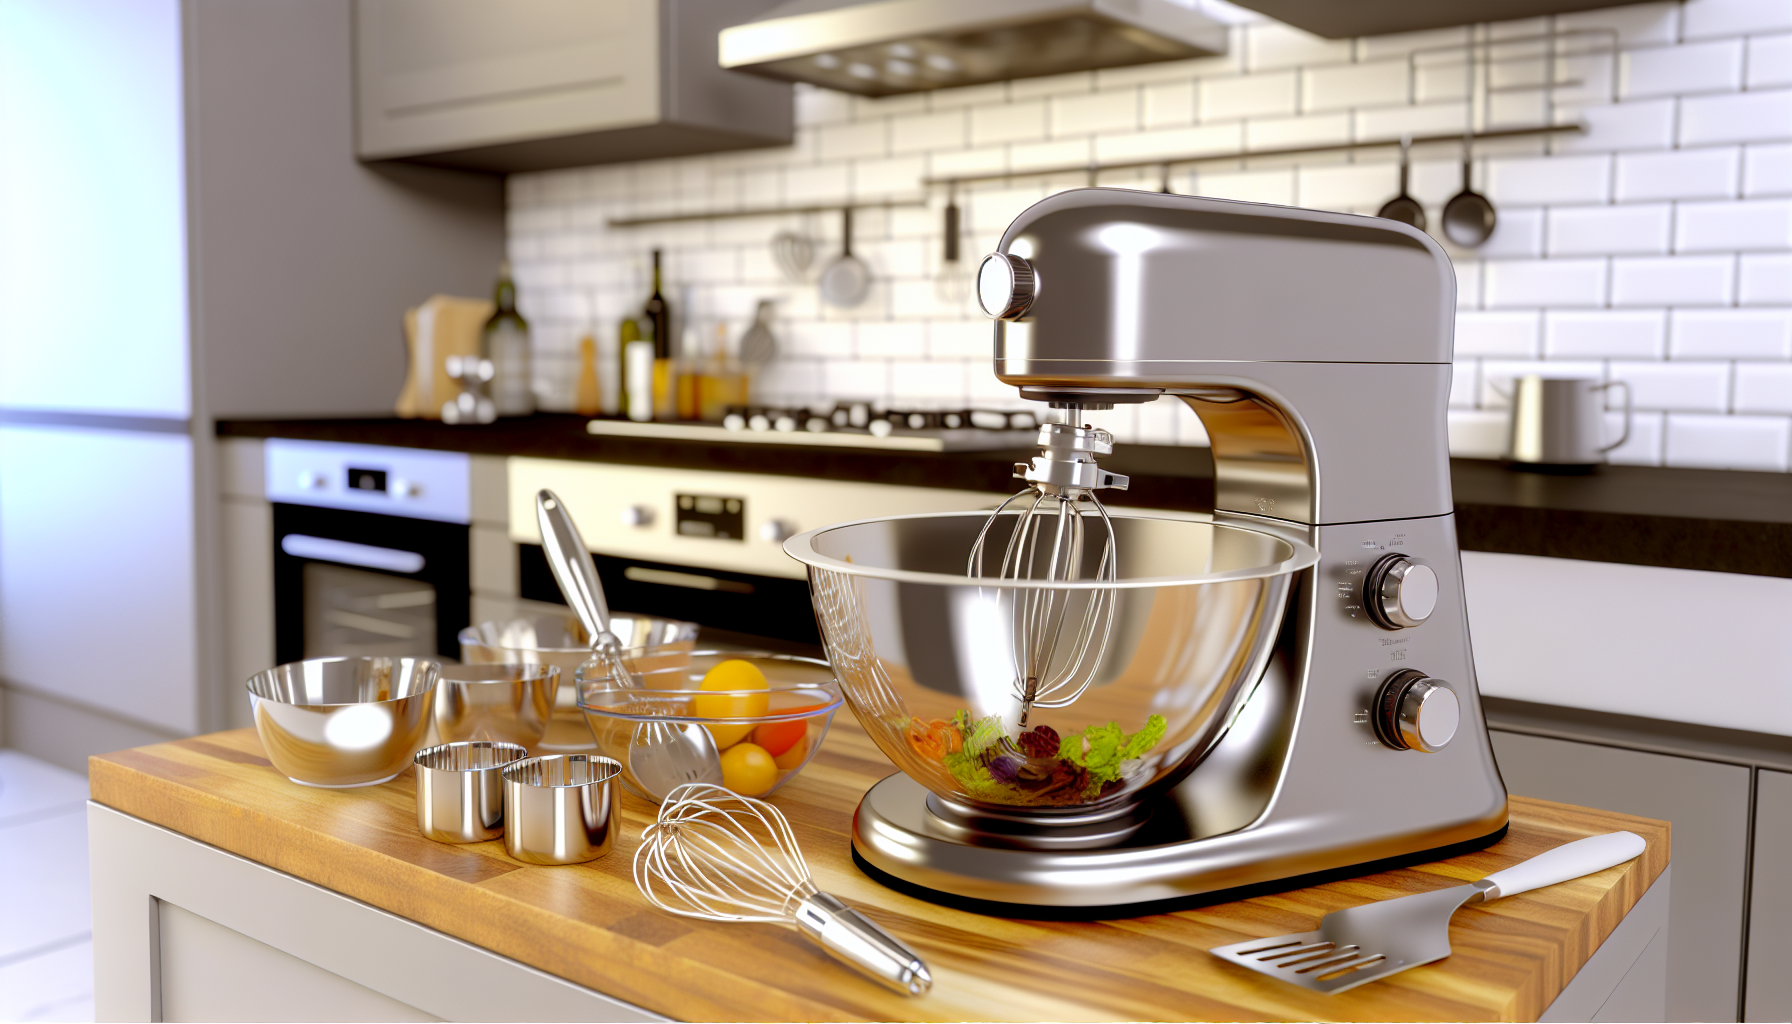 Various kitchen appliances including stand mixers, dough hooks, and mixing bowls